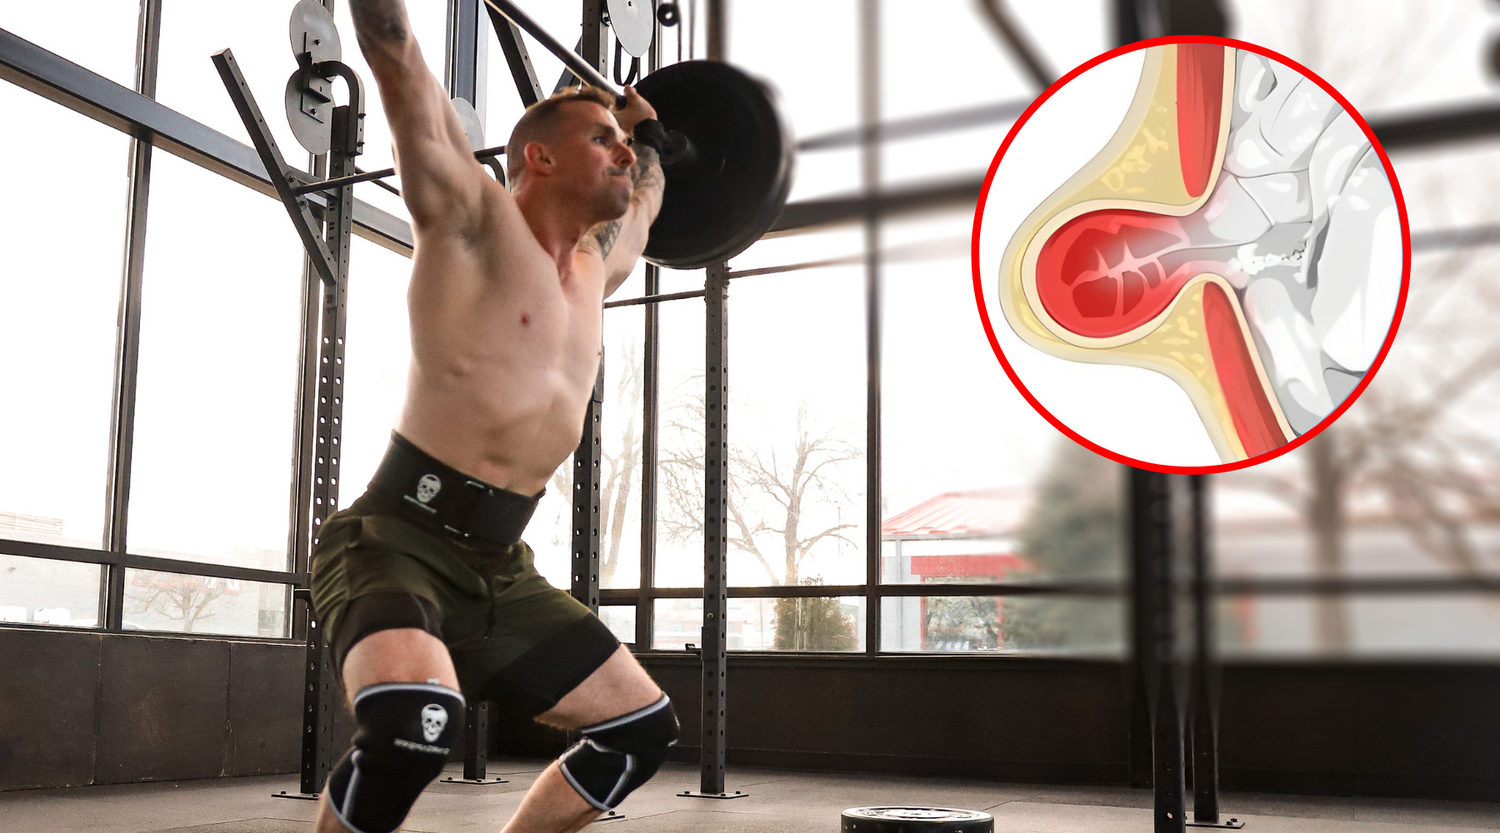 Does A Lifting Belt Prevent Hernias? (A PT Answers)